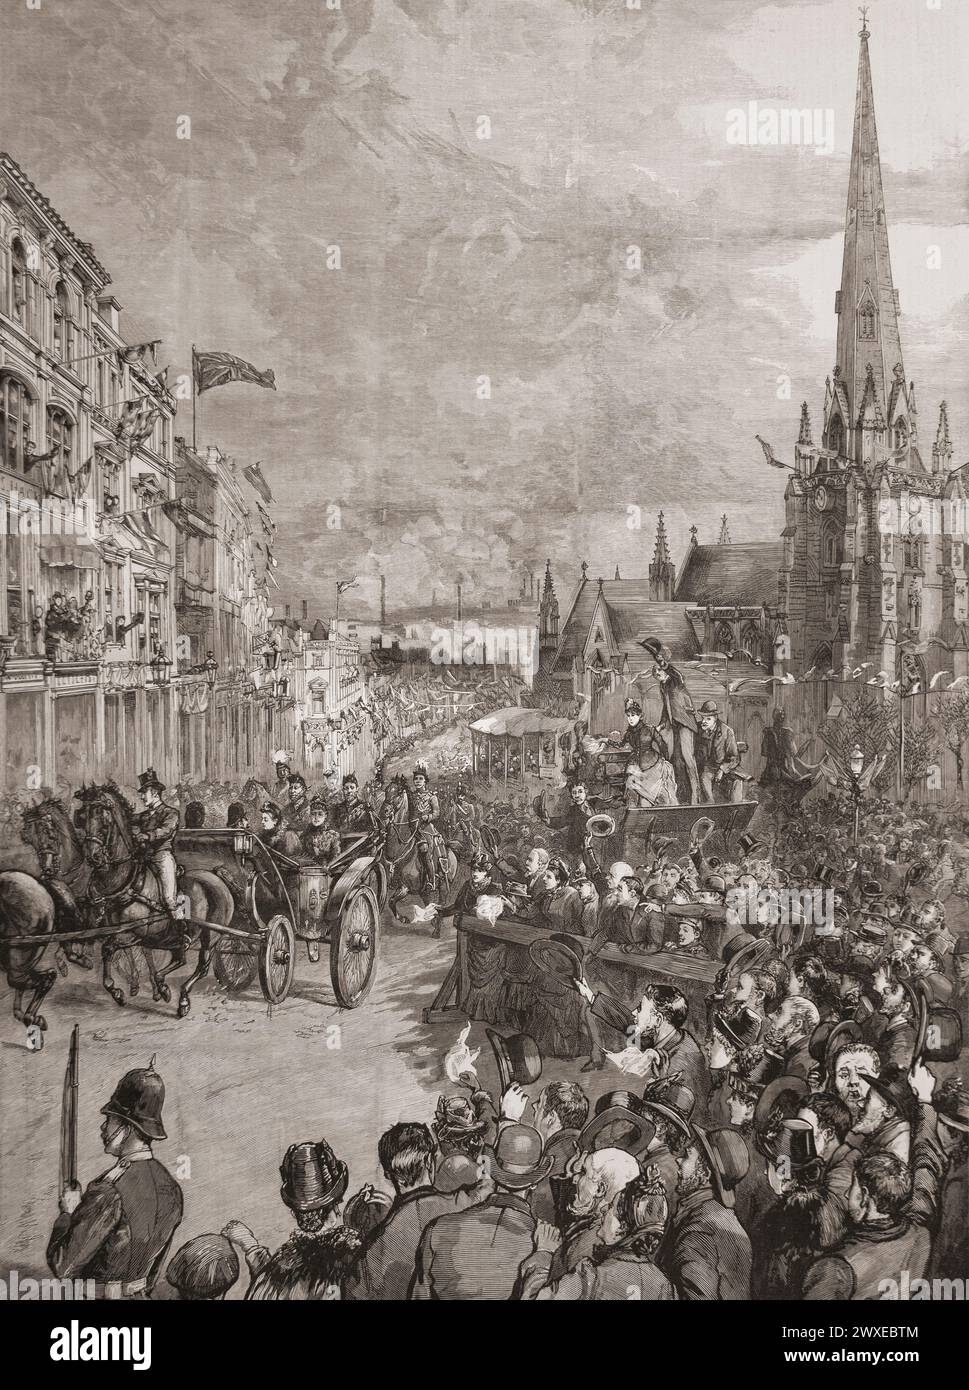 Queen Victoria's visit to the Bull Ring, Birmingham, in 1887 for the Golden Jubilee celebrations.  From The Graphic Illustrated Weekly Newspaper, printed 1887. Stock Photo